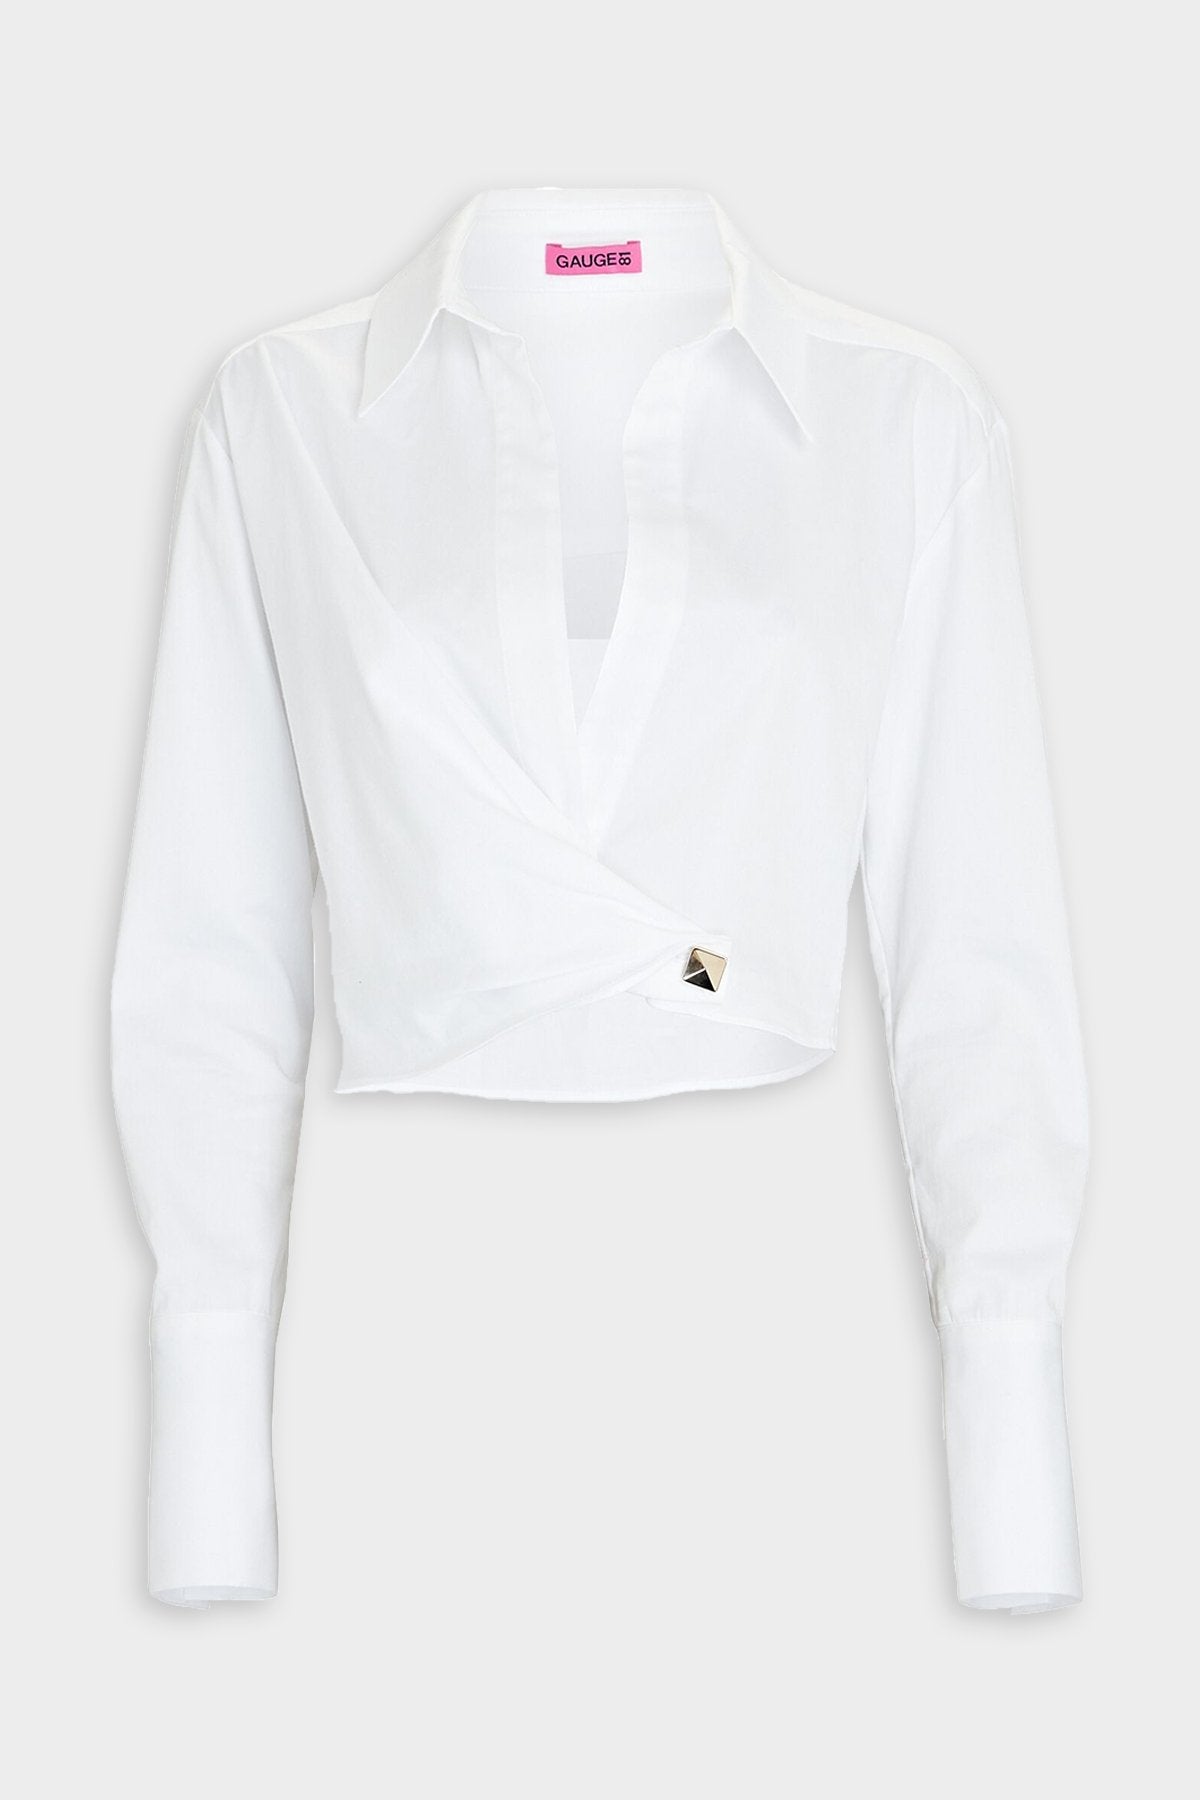 Kavos Cropped Wrap Blouse in White - shop-olivia.com